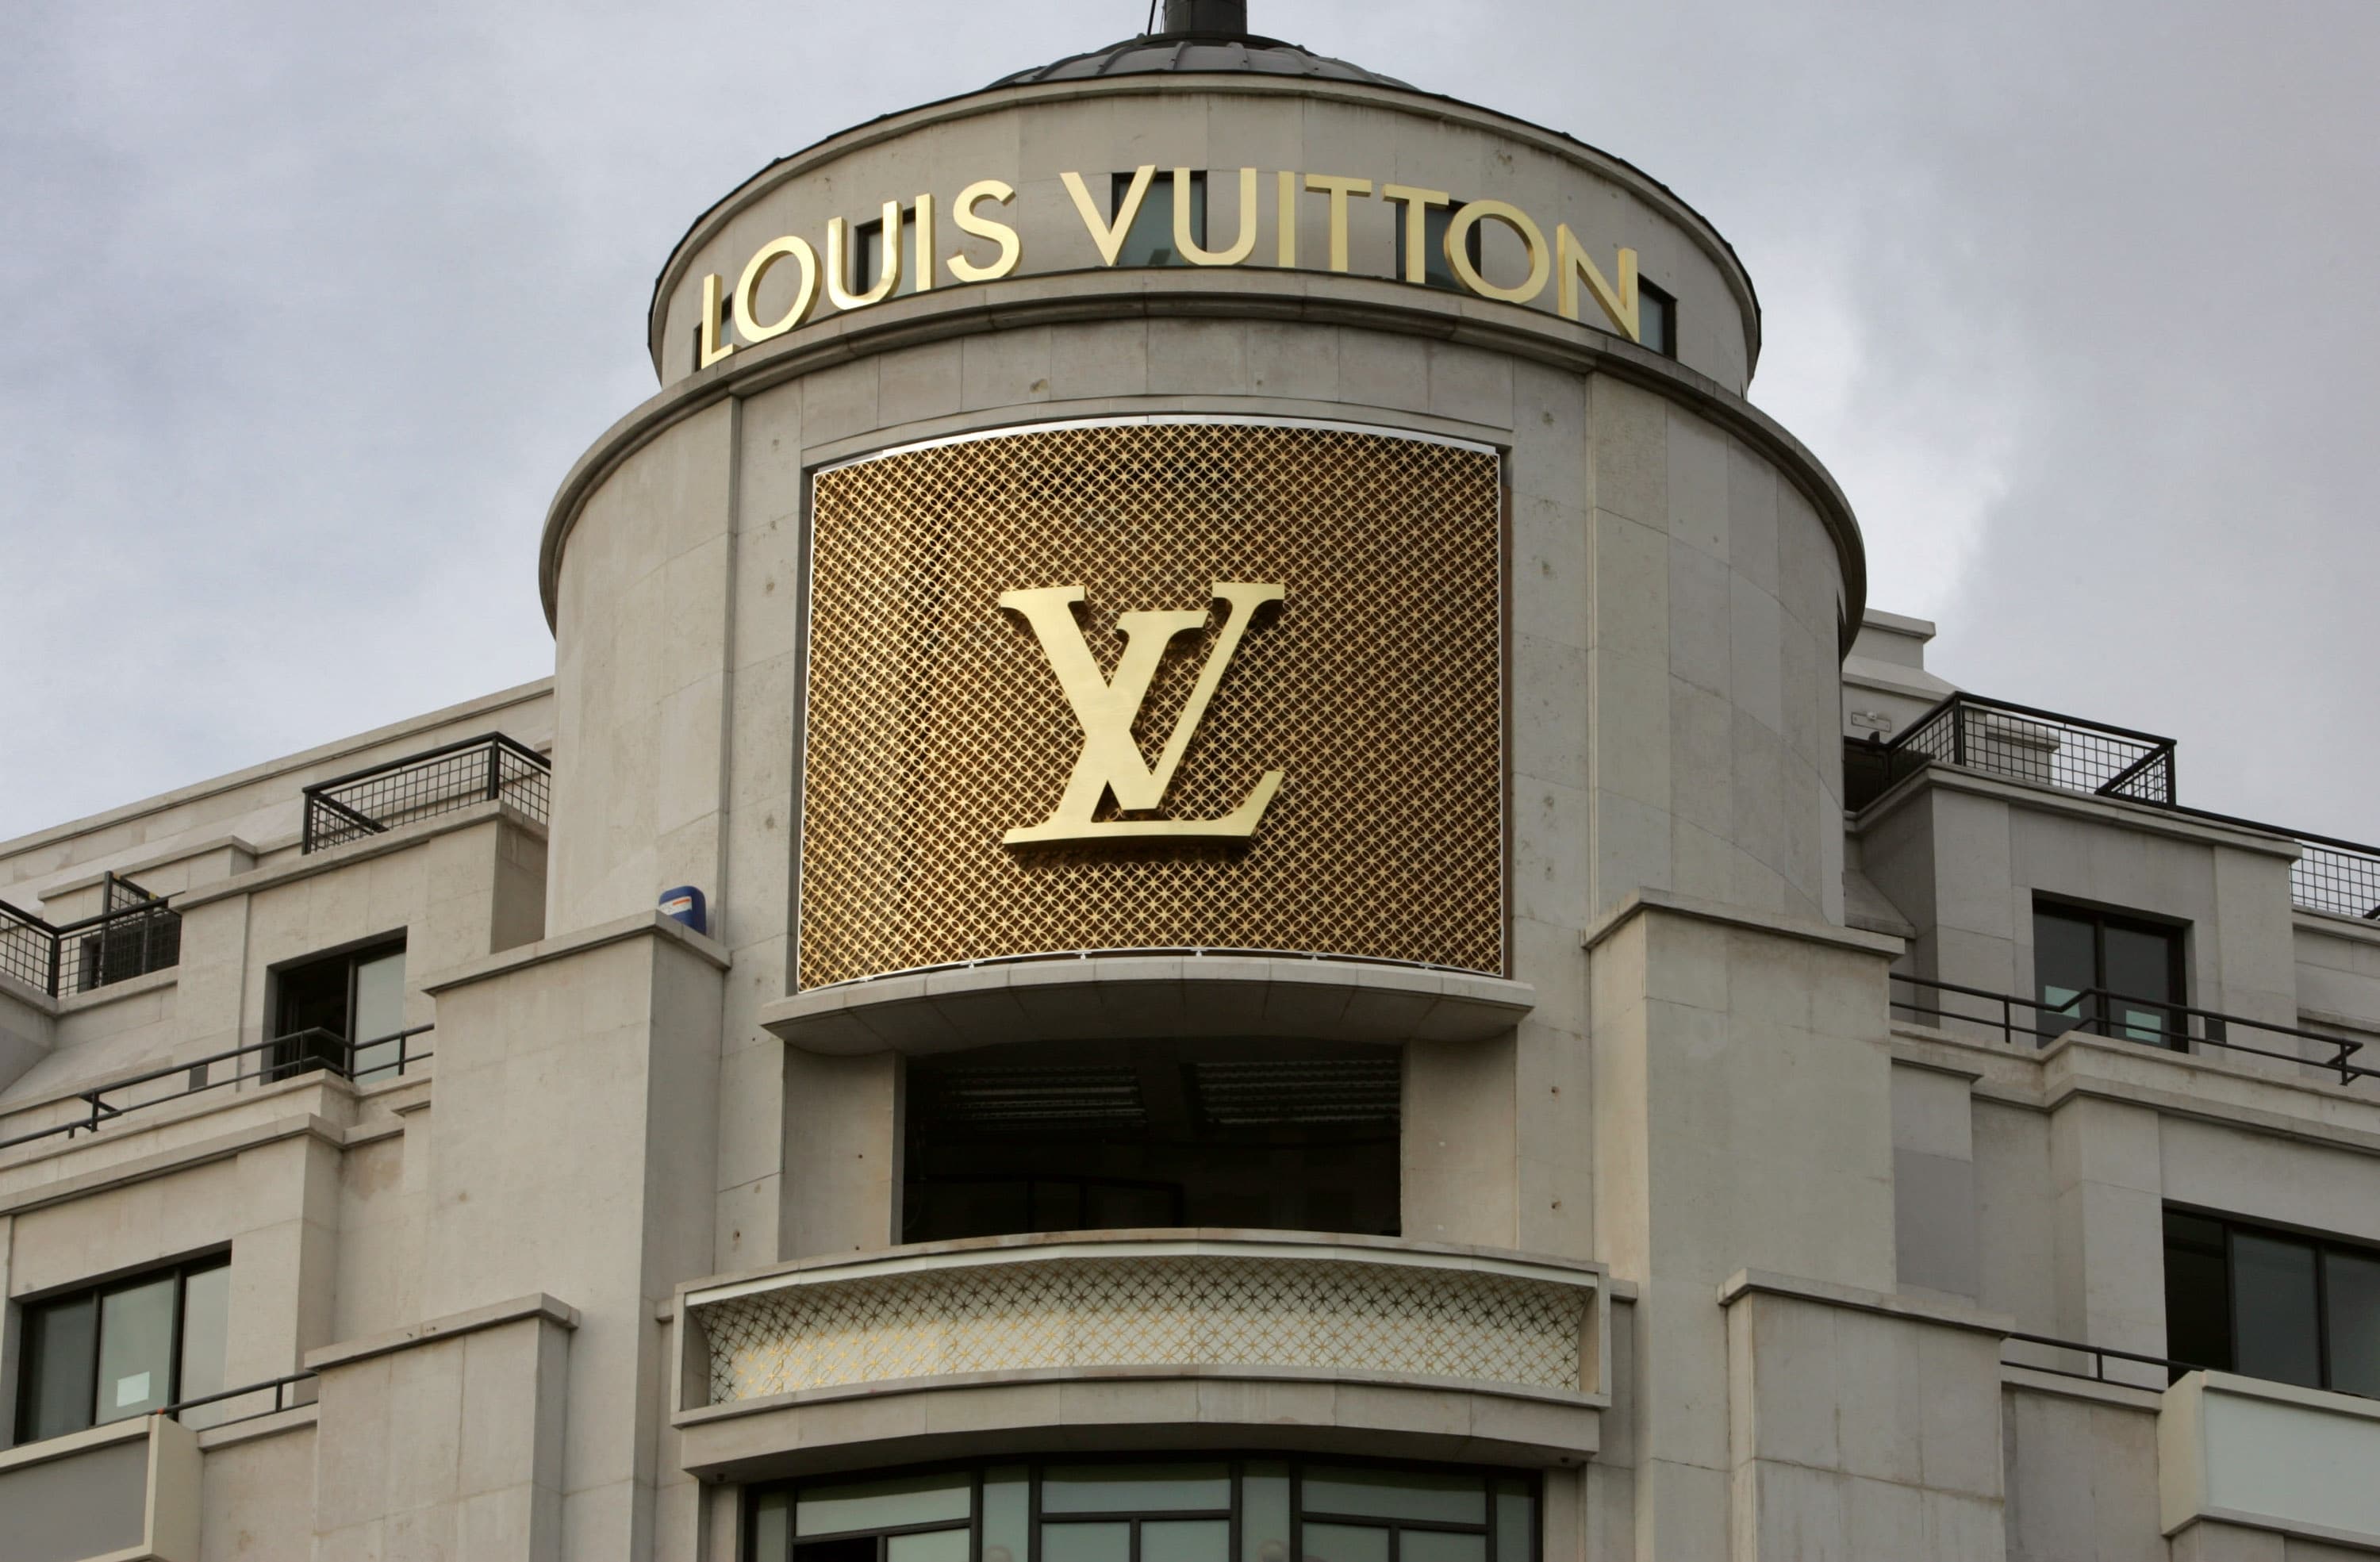 CAC 40: Global Luxury Downturn Hits LVMH Sales Growth in Q3